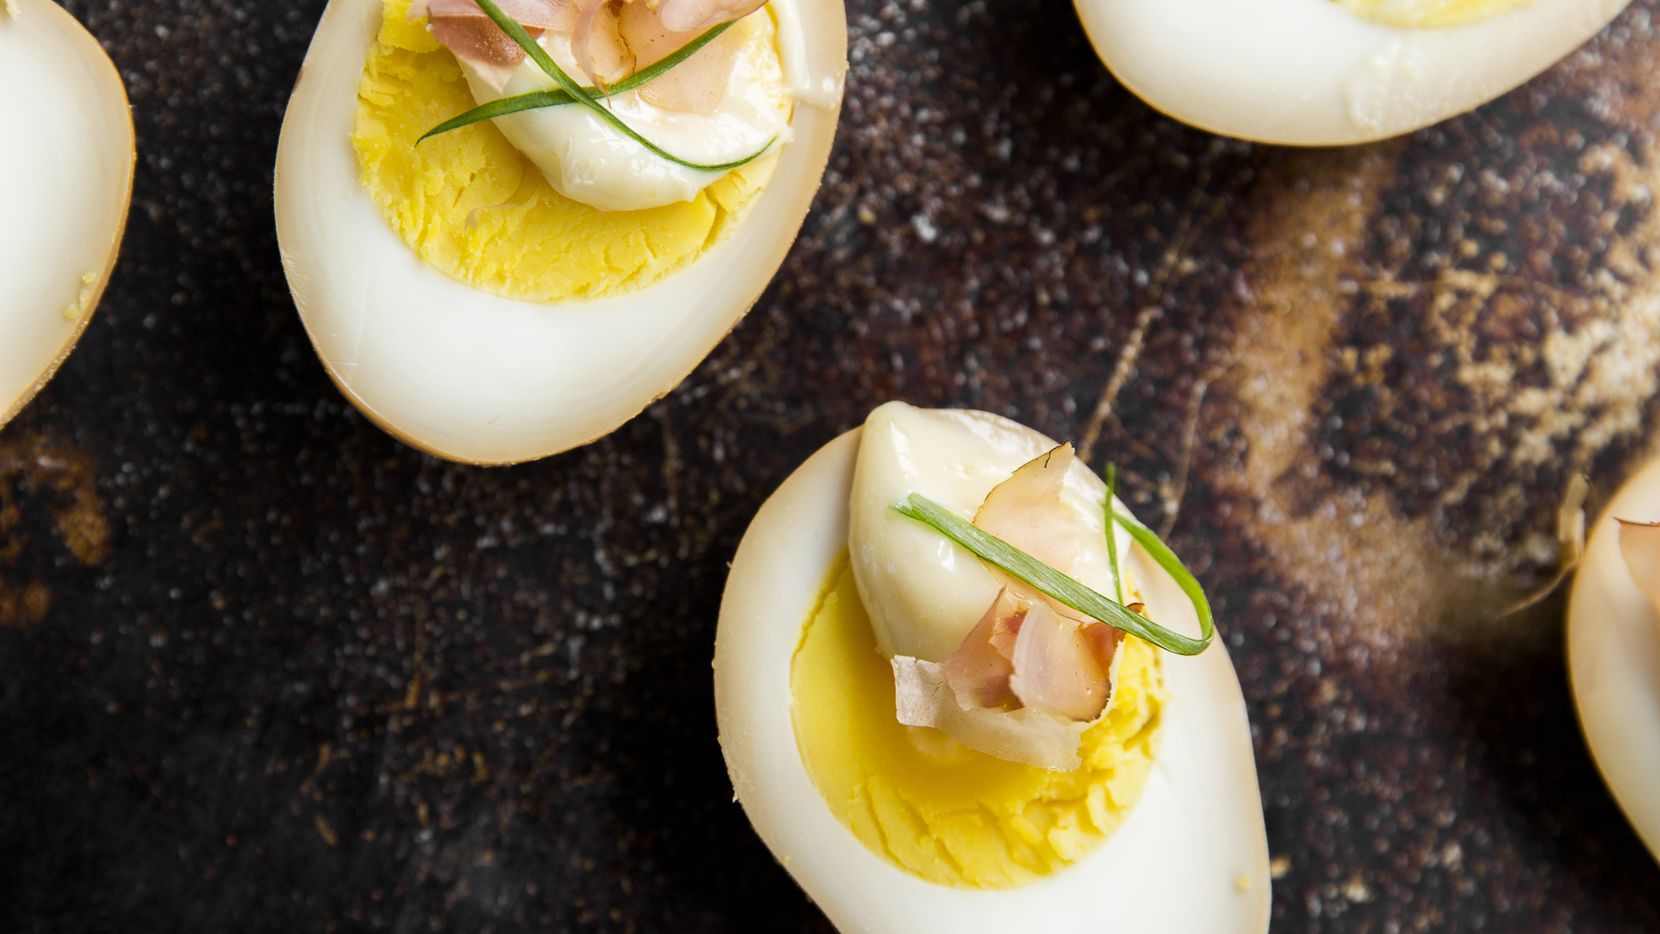 SOY SAUCE PICKLED  DEVILED EGGS  from Houston chef Chris Shepherd's new cookbook, 'Cook Like a Local: Flavors than Can Change How You Cook and See the World,' co-written with Kaitlyn Goalen (Clarkson Potter, $35)